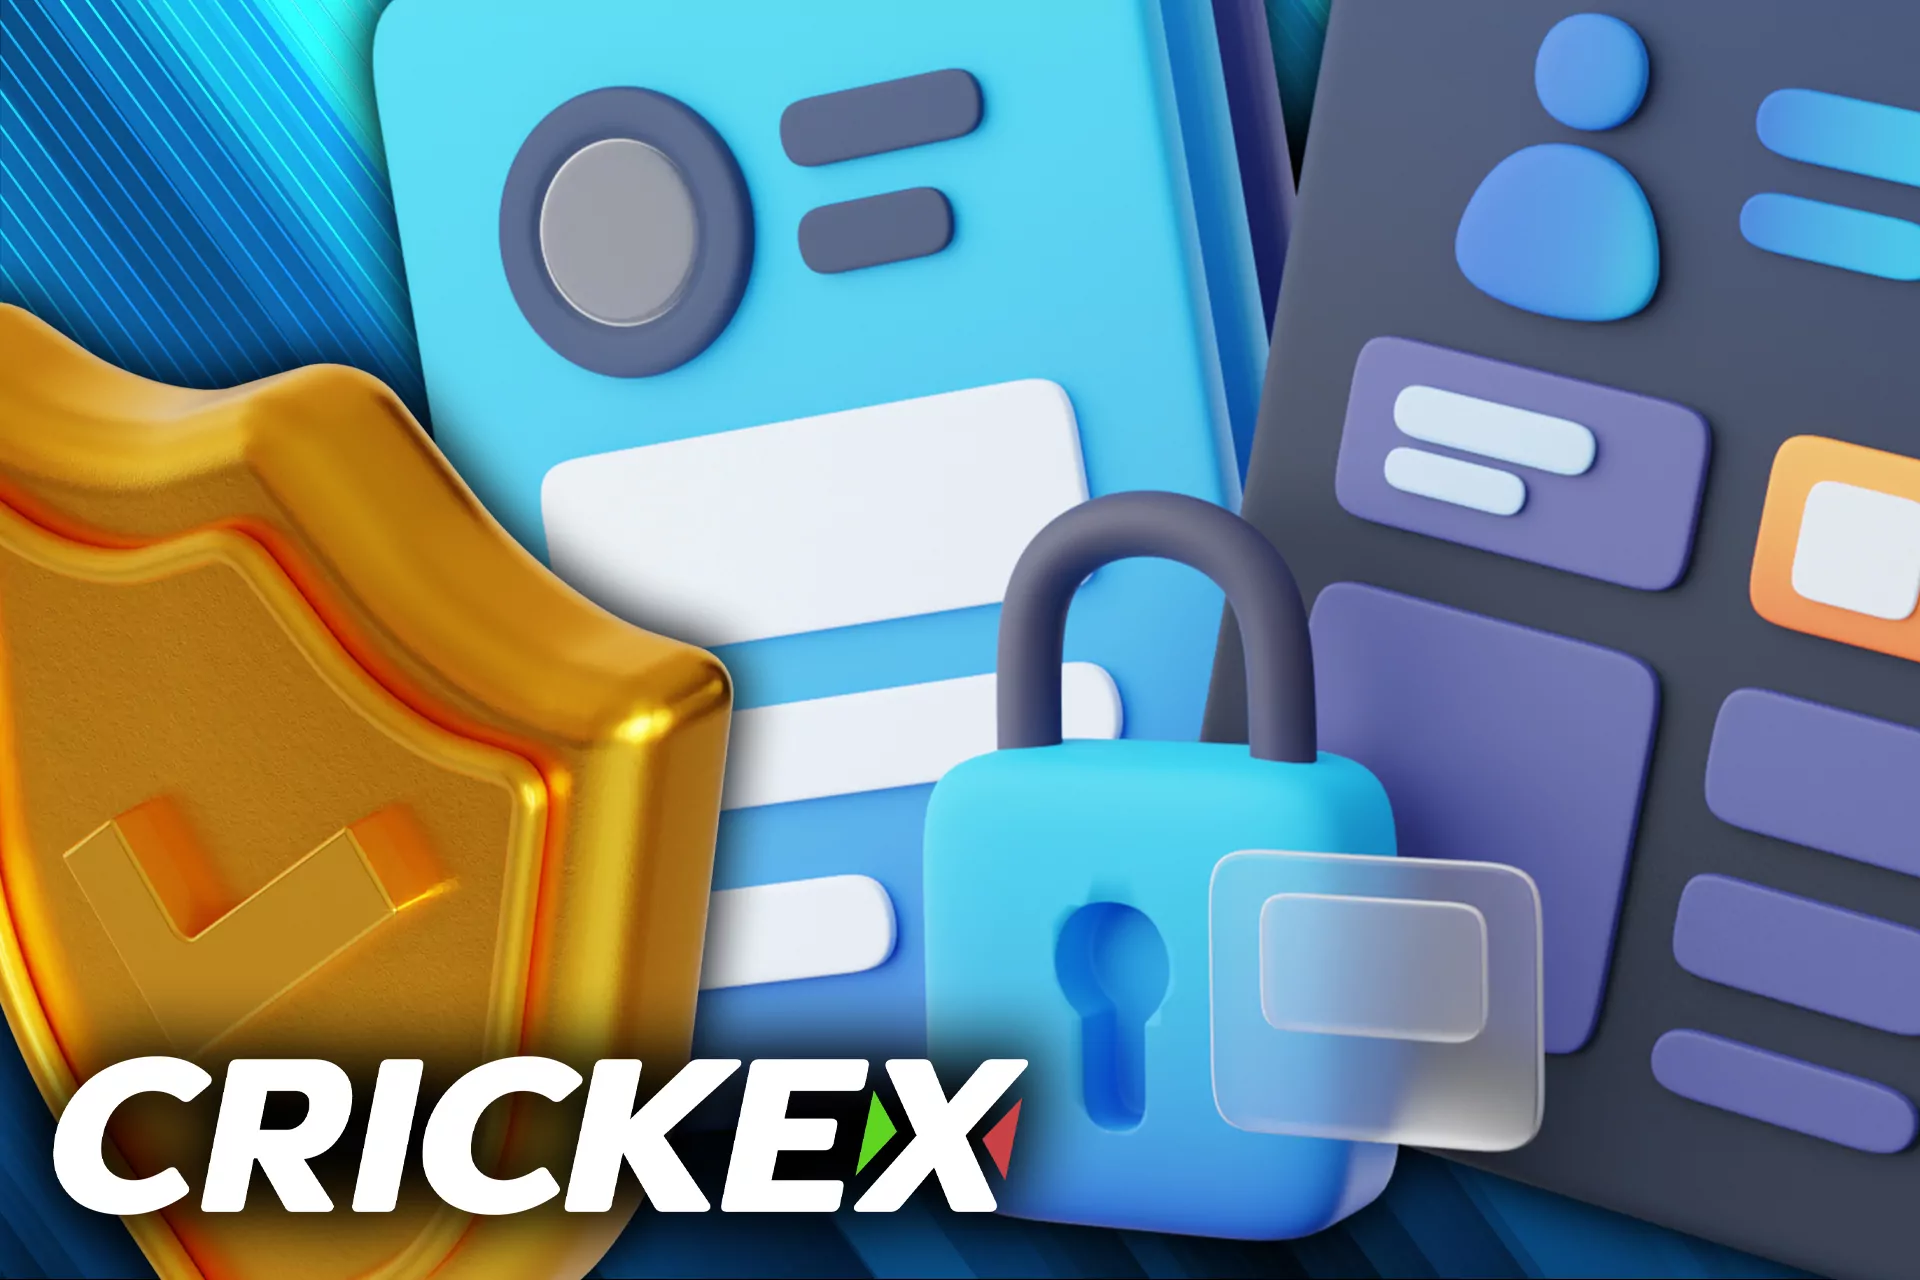 Crickex strongly protects personal information of its users.